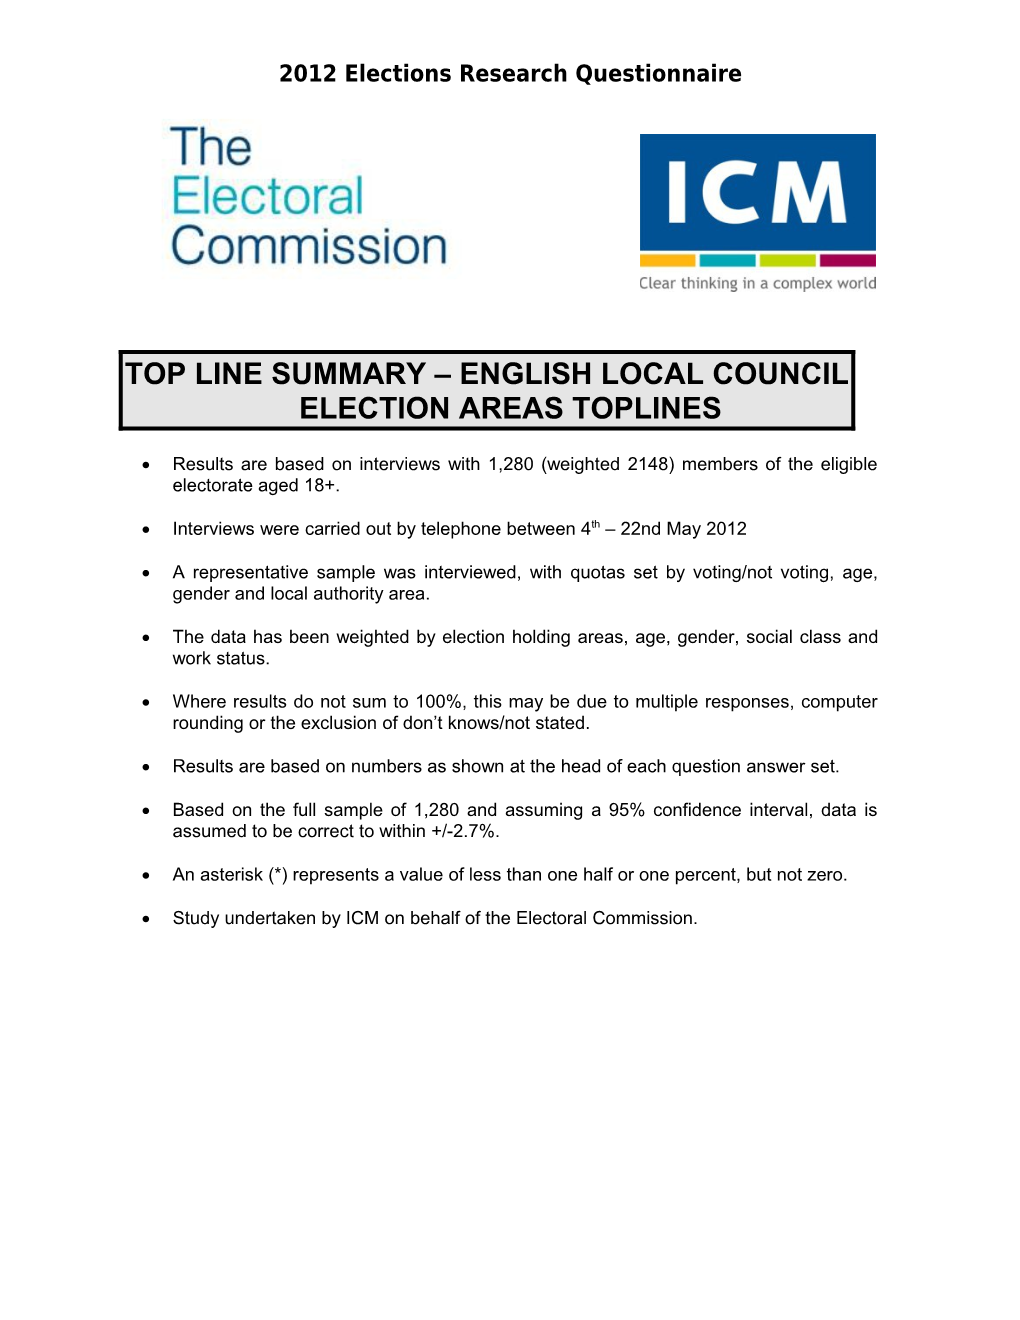 Top Line Summary English Local Council Election Areas Toplines